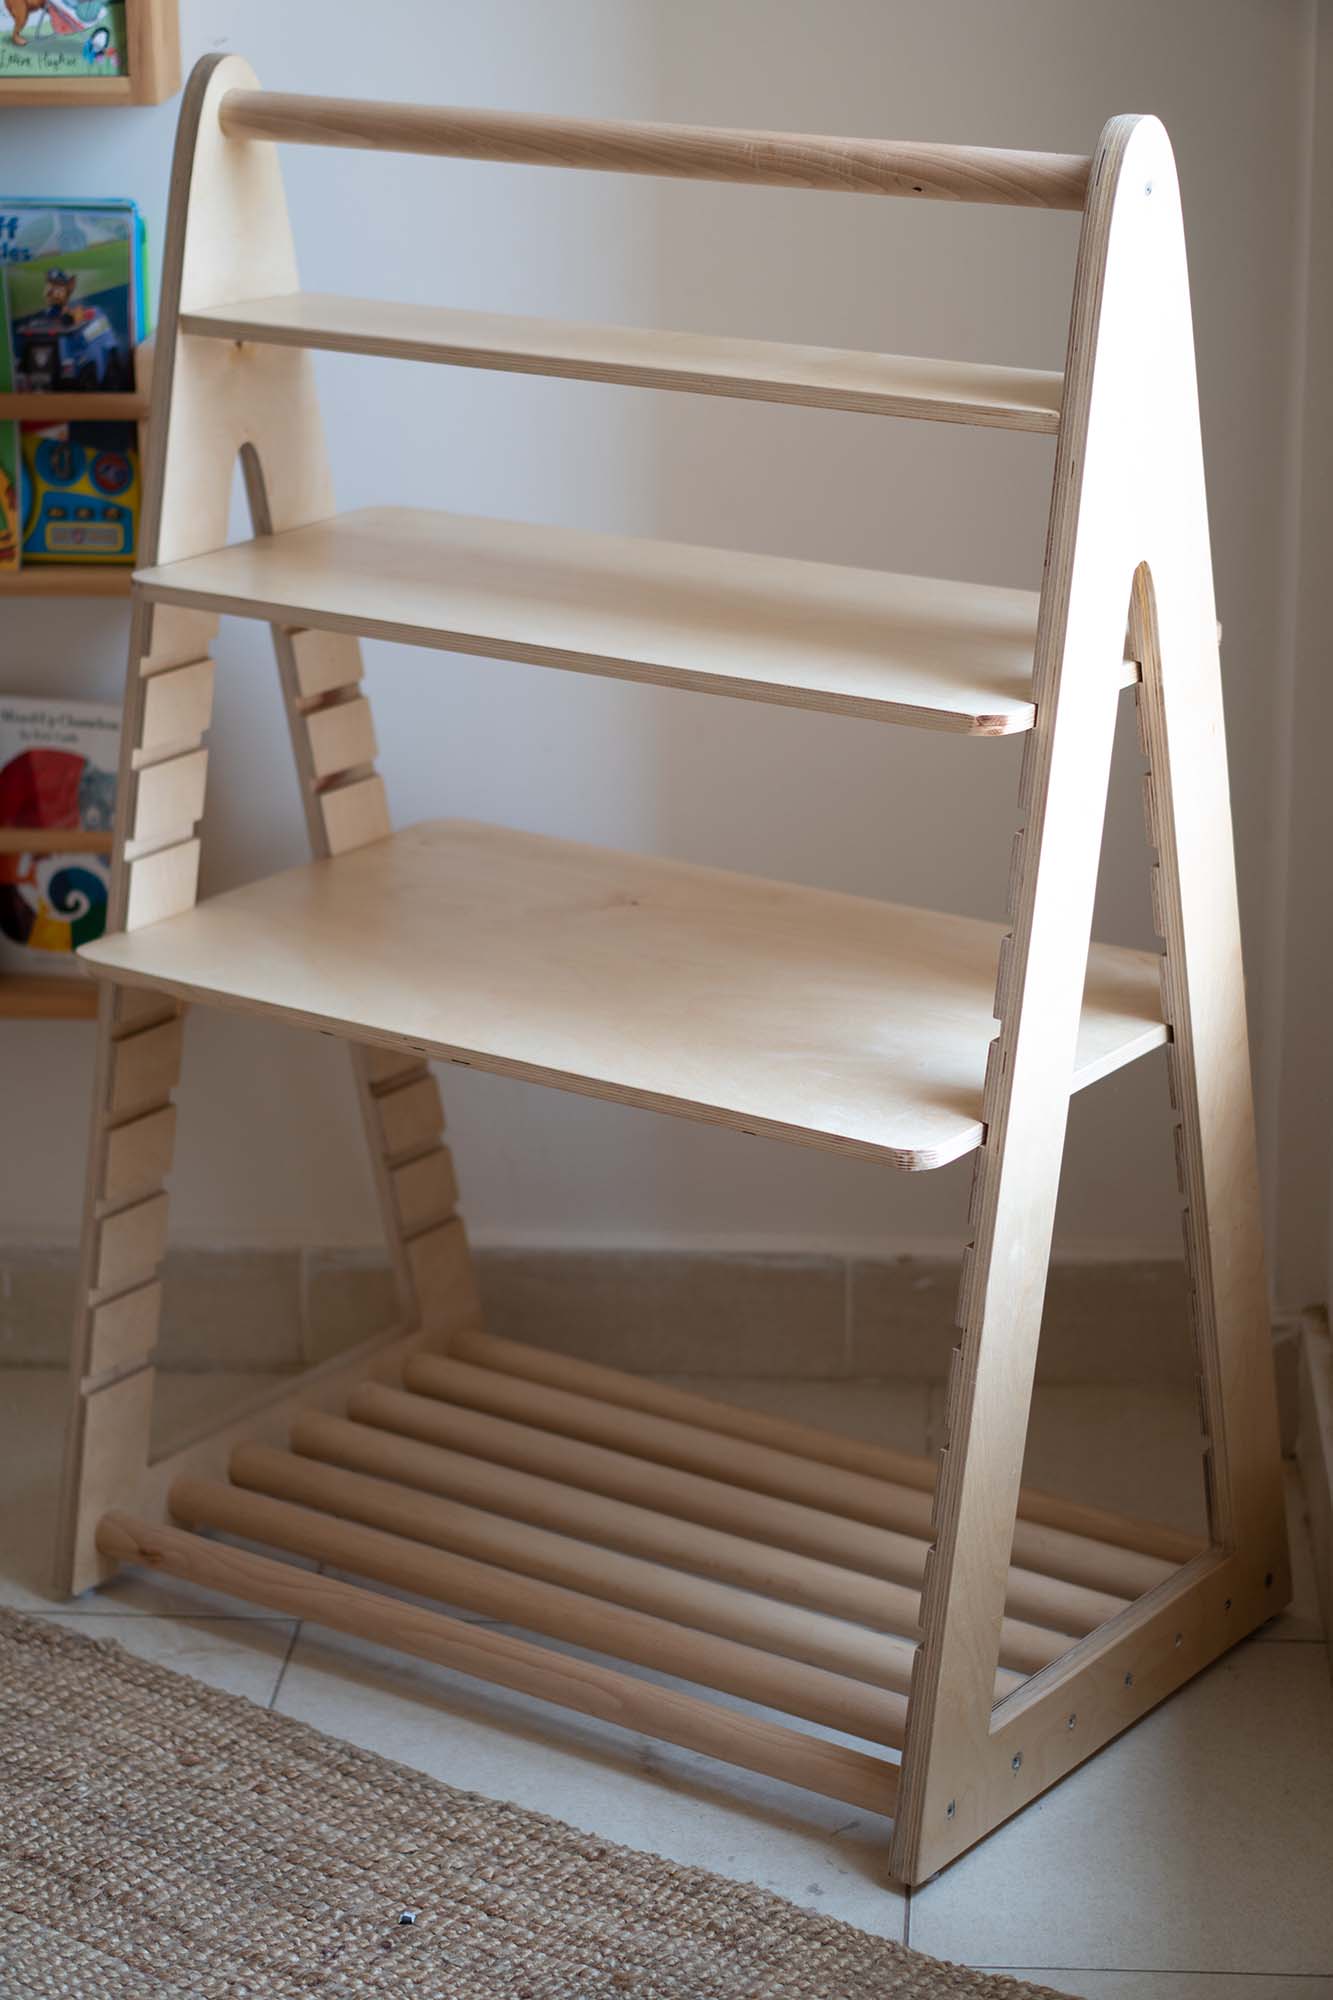 Adjustable Shelving Unit for Kids Toys and Storage Boxes